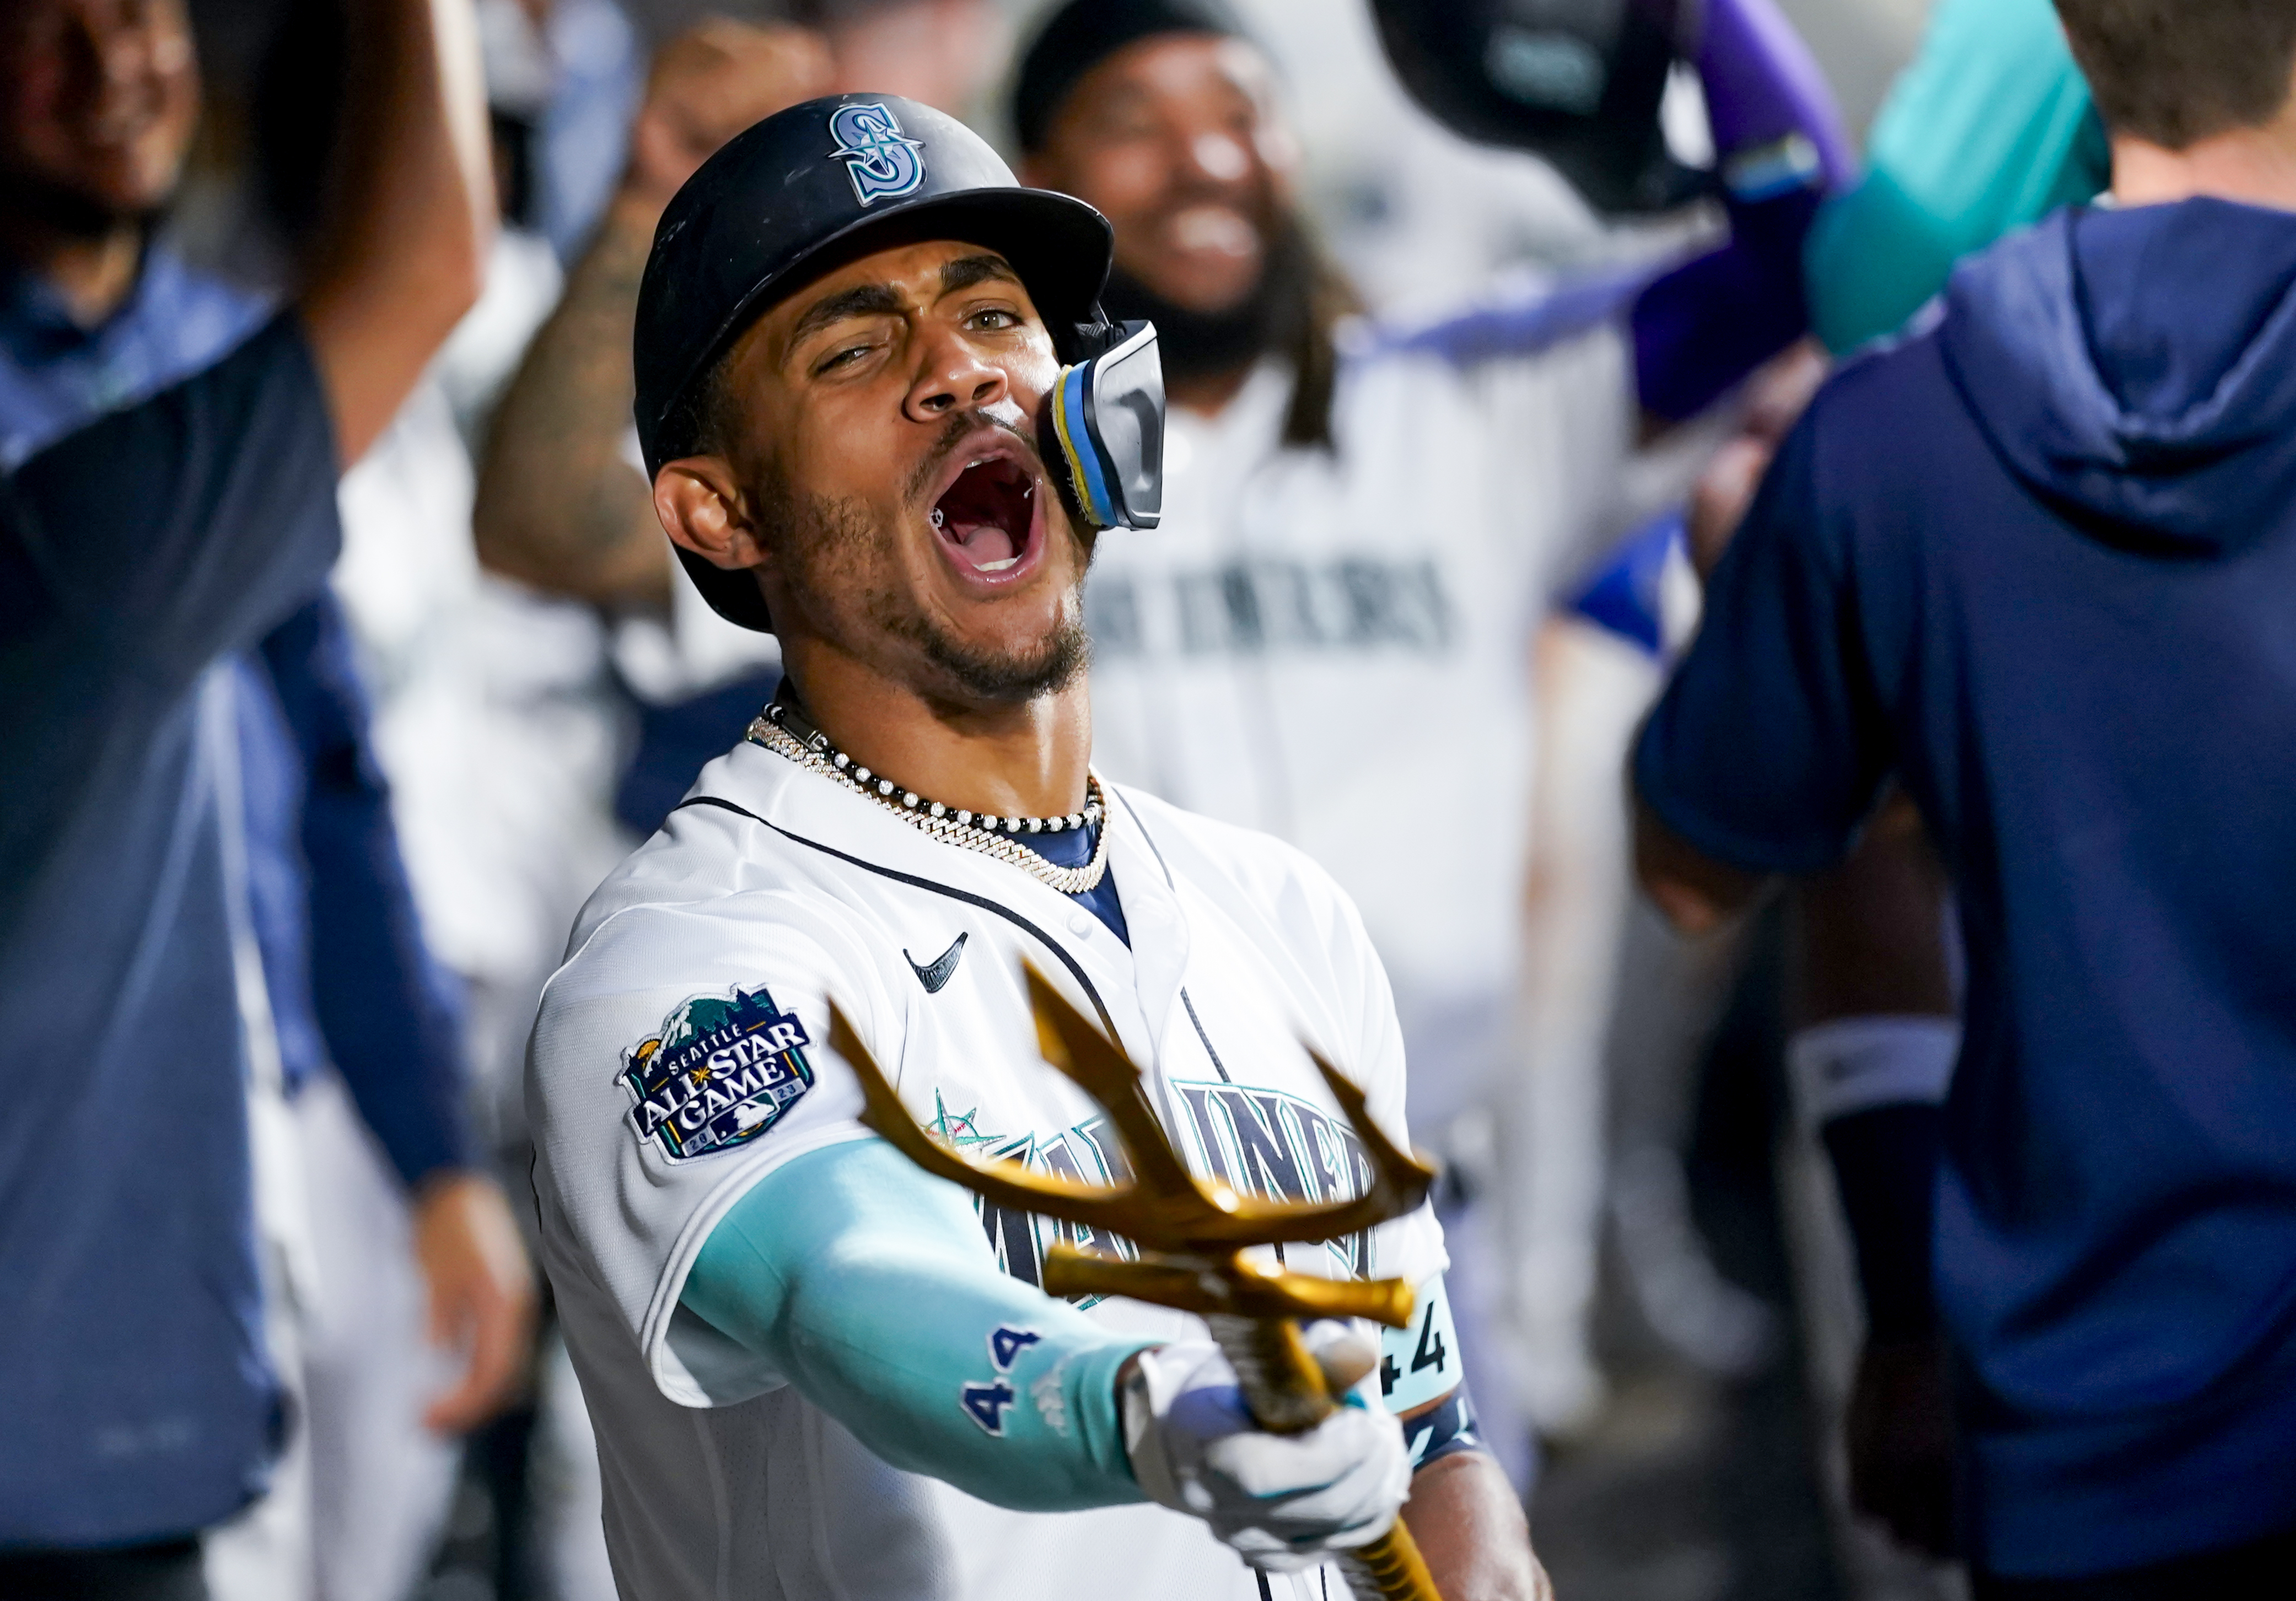 Julio Rodríguez and the Mariners stay red hot with win over Oakland